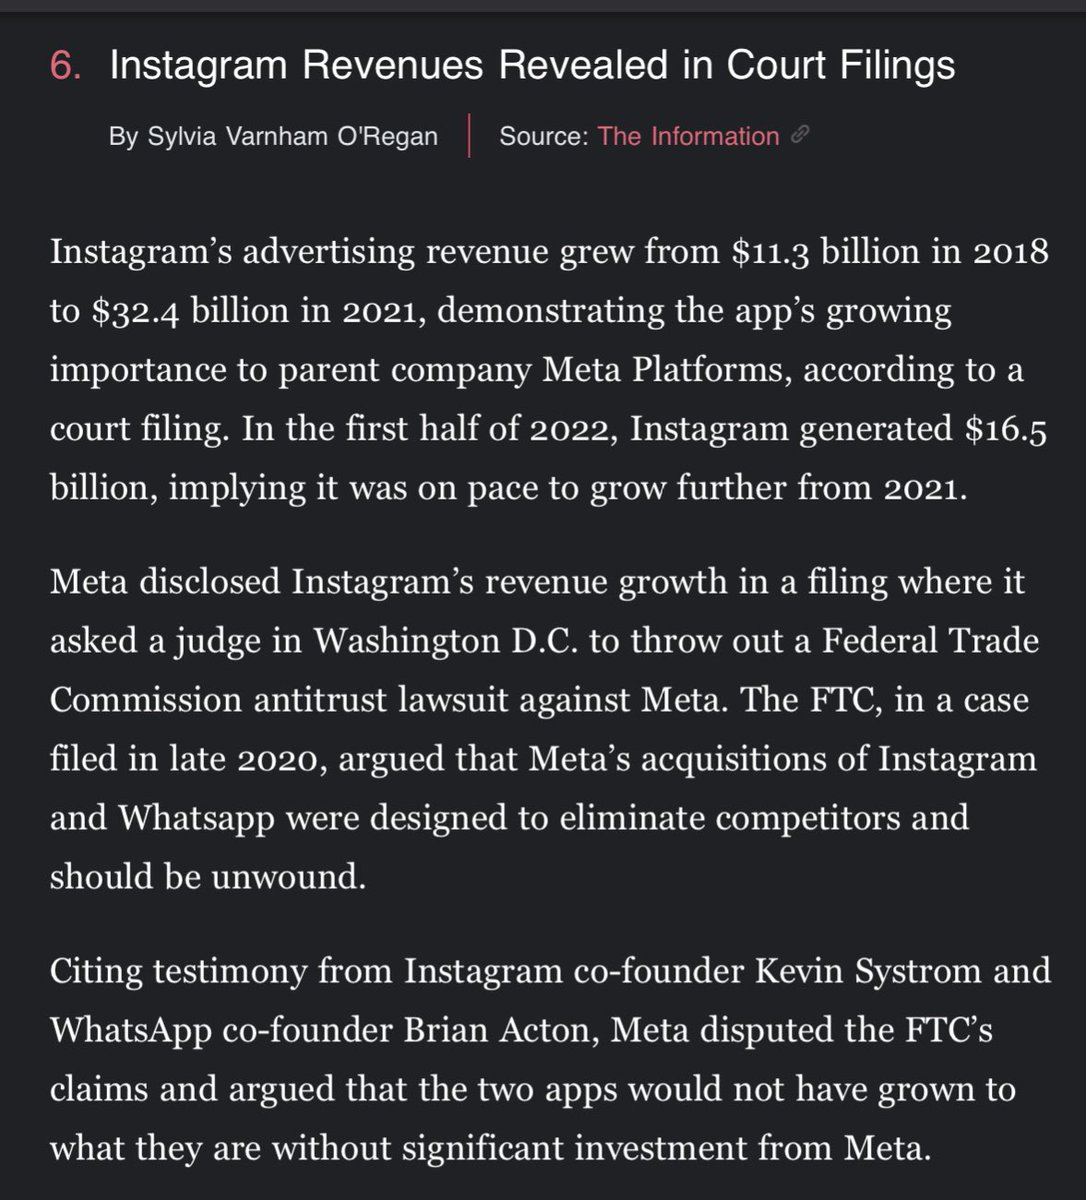 I remember the exact startup standing desk I was standing at hen the news hit re: Facebook buying Instagram. $1.2B or something like that. What a deal… I’ve always wondered what it would be if it were now spun out, but last point is true, too - that FB helped supercharge growth.